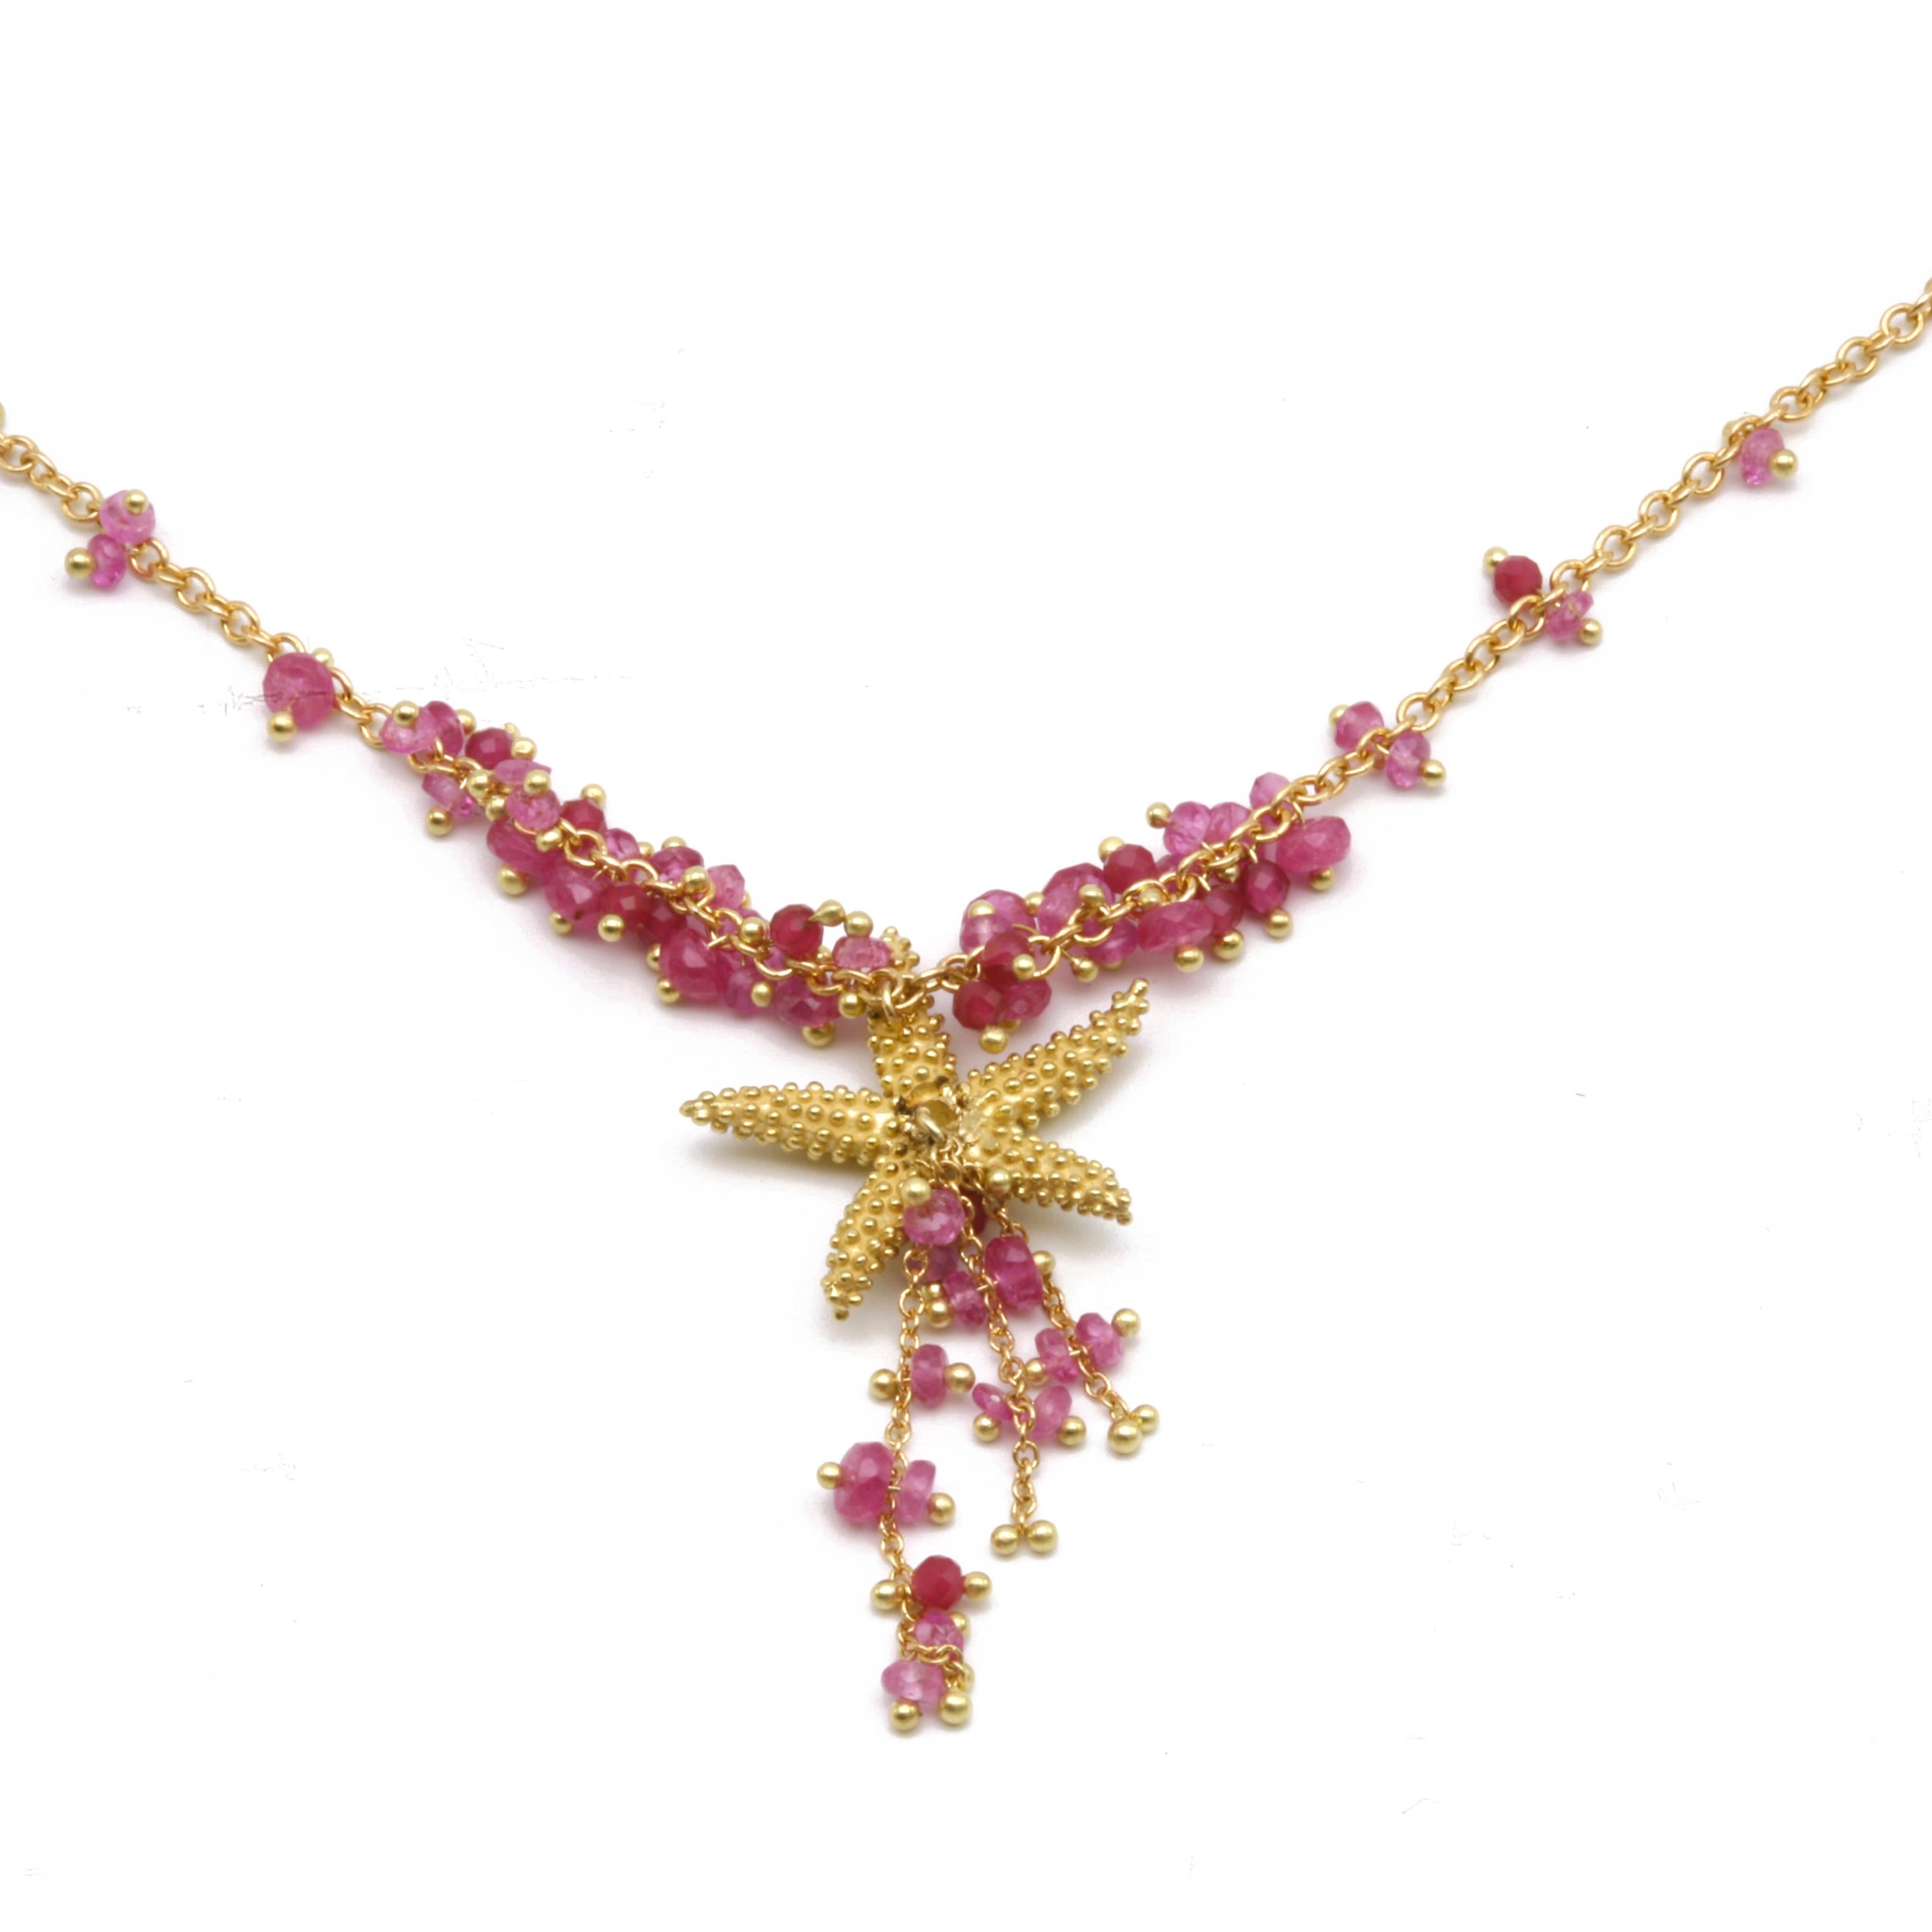 Diana Kim England Seastar Necklace with Pink Sapphire Faceted Beads in 18k Gold For Sale 1